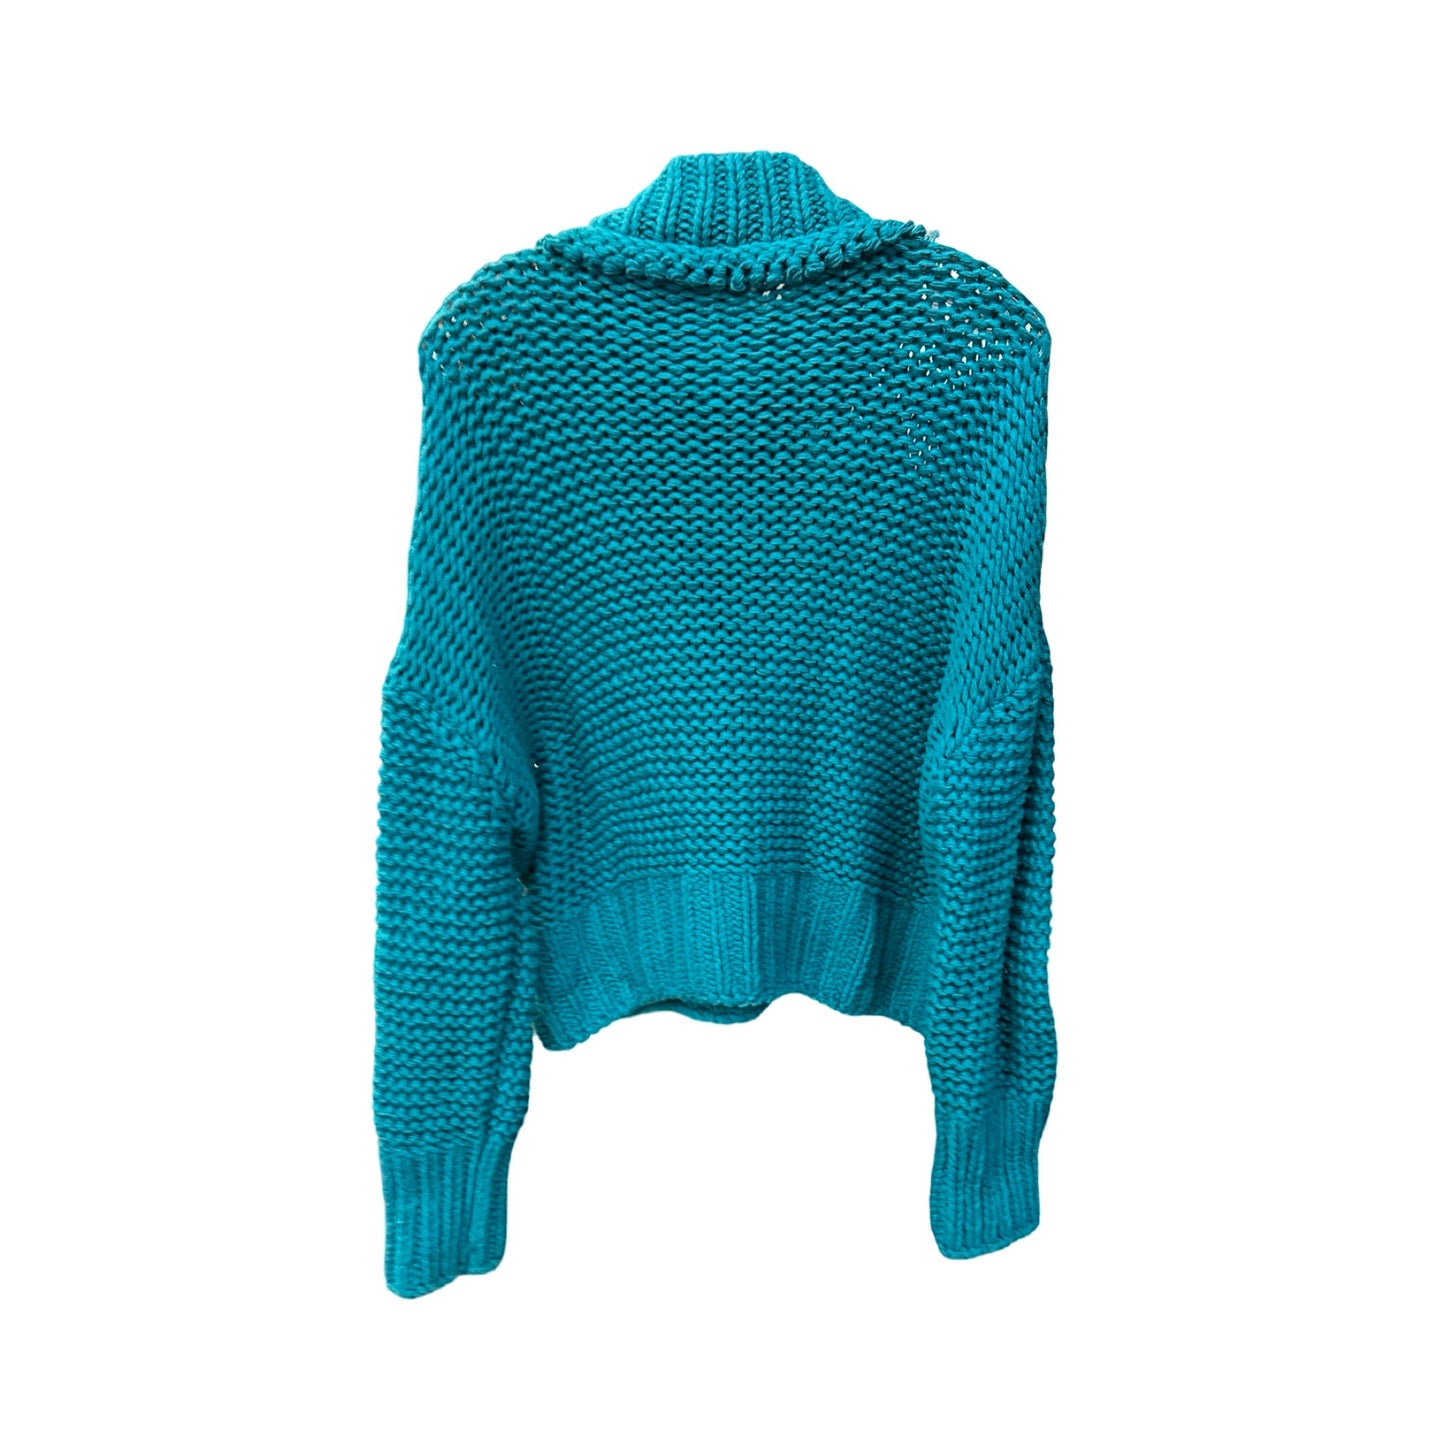 Teal Sweater Free People, Size S